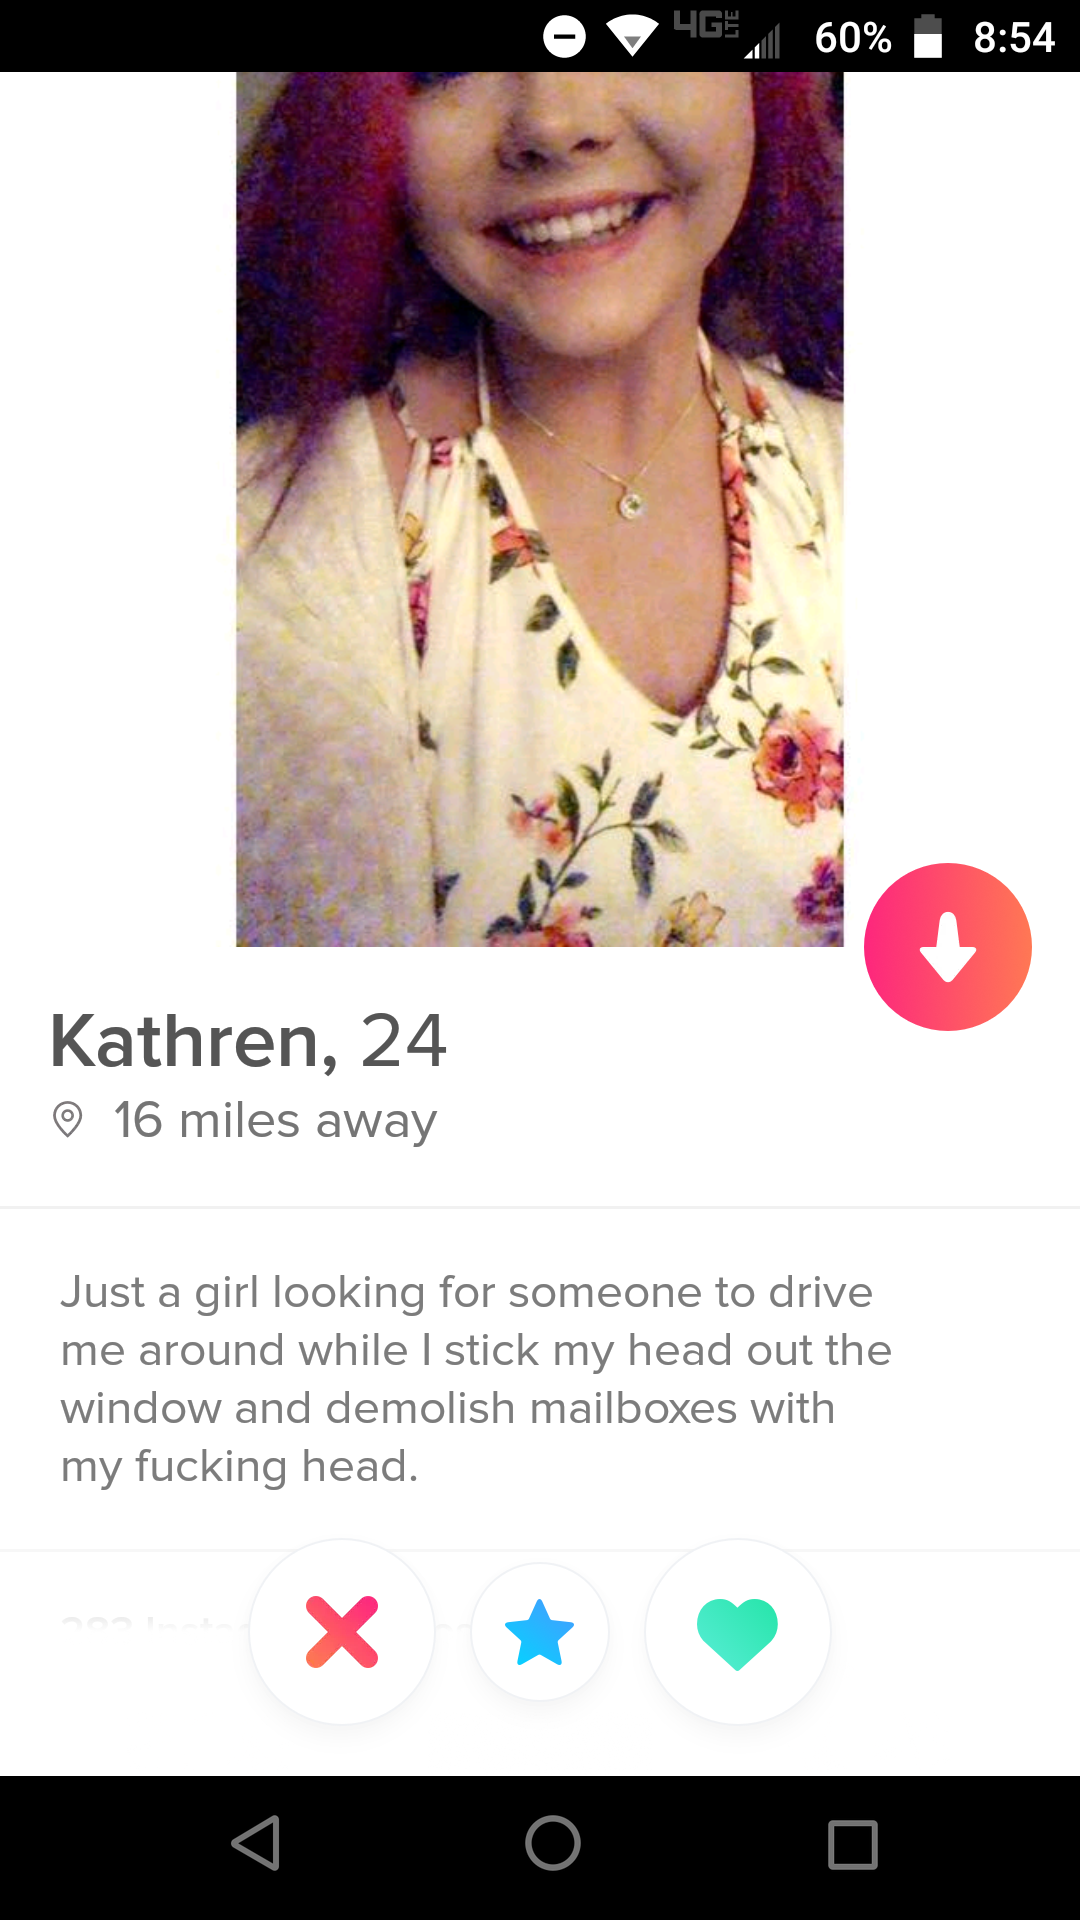 Shameless Tinder profile that says Just a girl looking for someone to drive me around while I stick my head out the window and demolish mailboxes with my fucking head. X